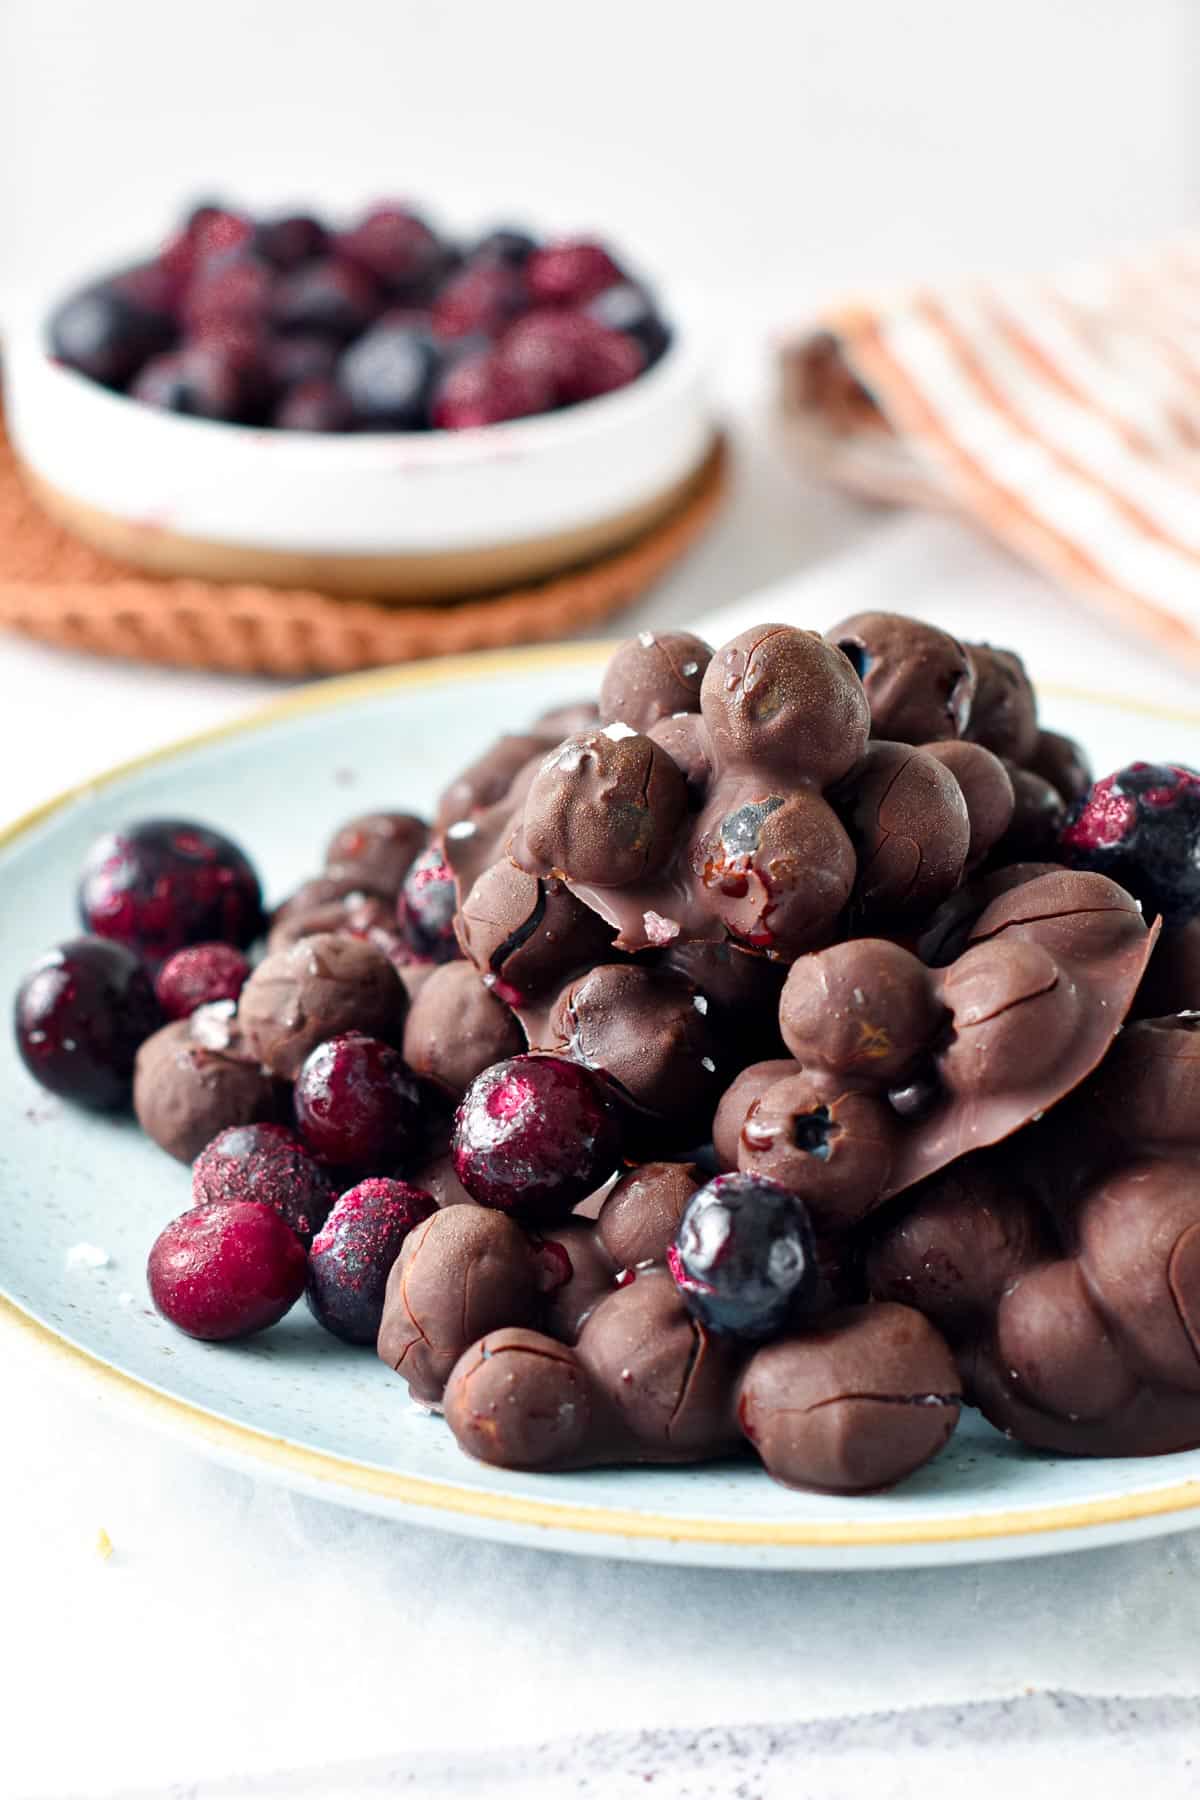 These Chocolate Covered Blueberries are the most easy snack ever made with just 3 ingredients and barely 20 minutes. Plus, this easy healthy snack is also keto-friendly, vegan and kids approved.